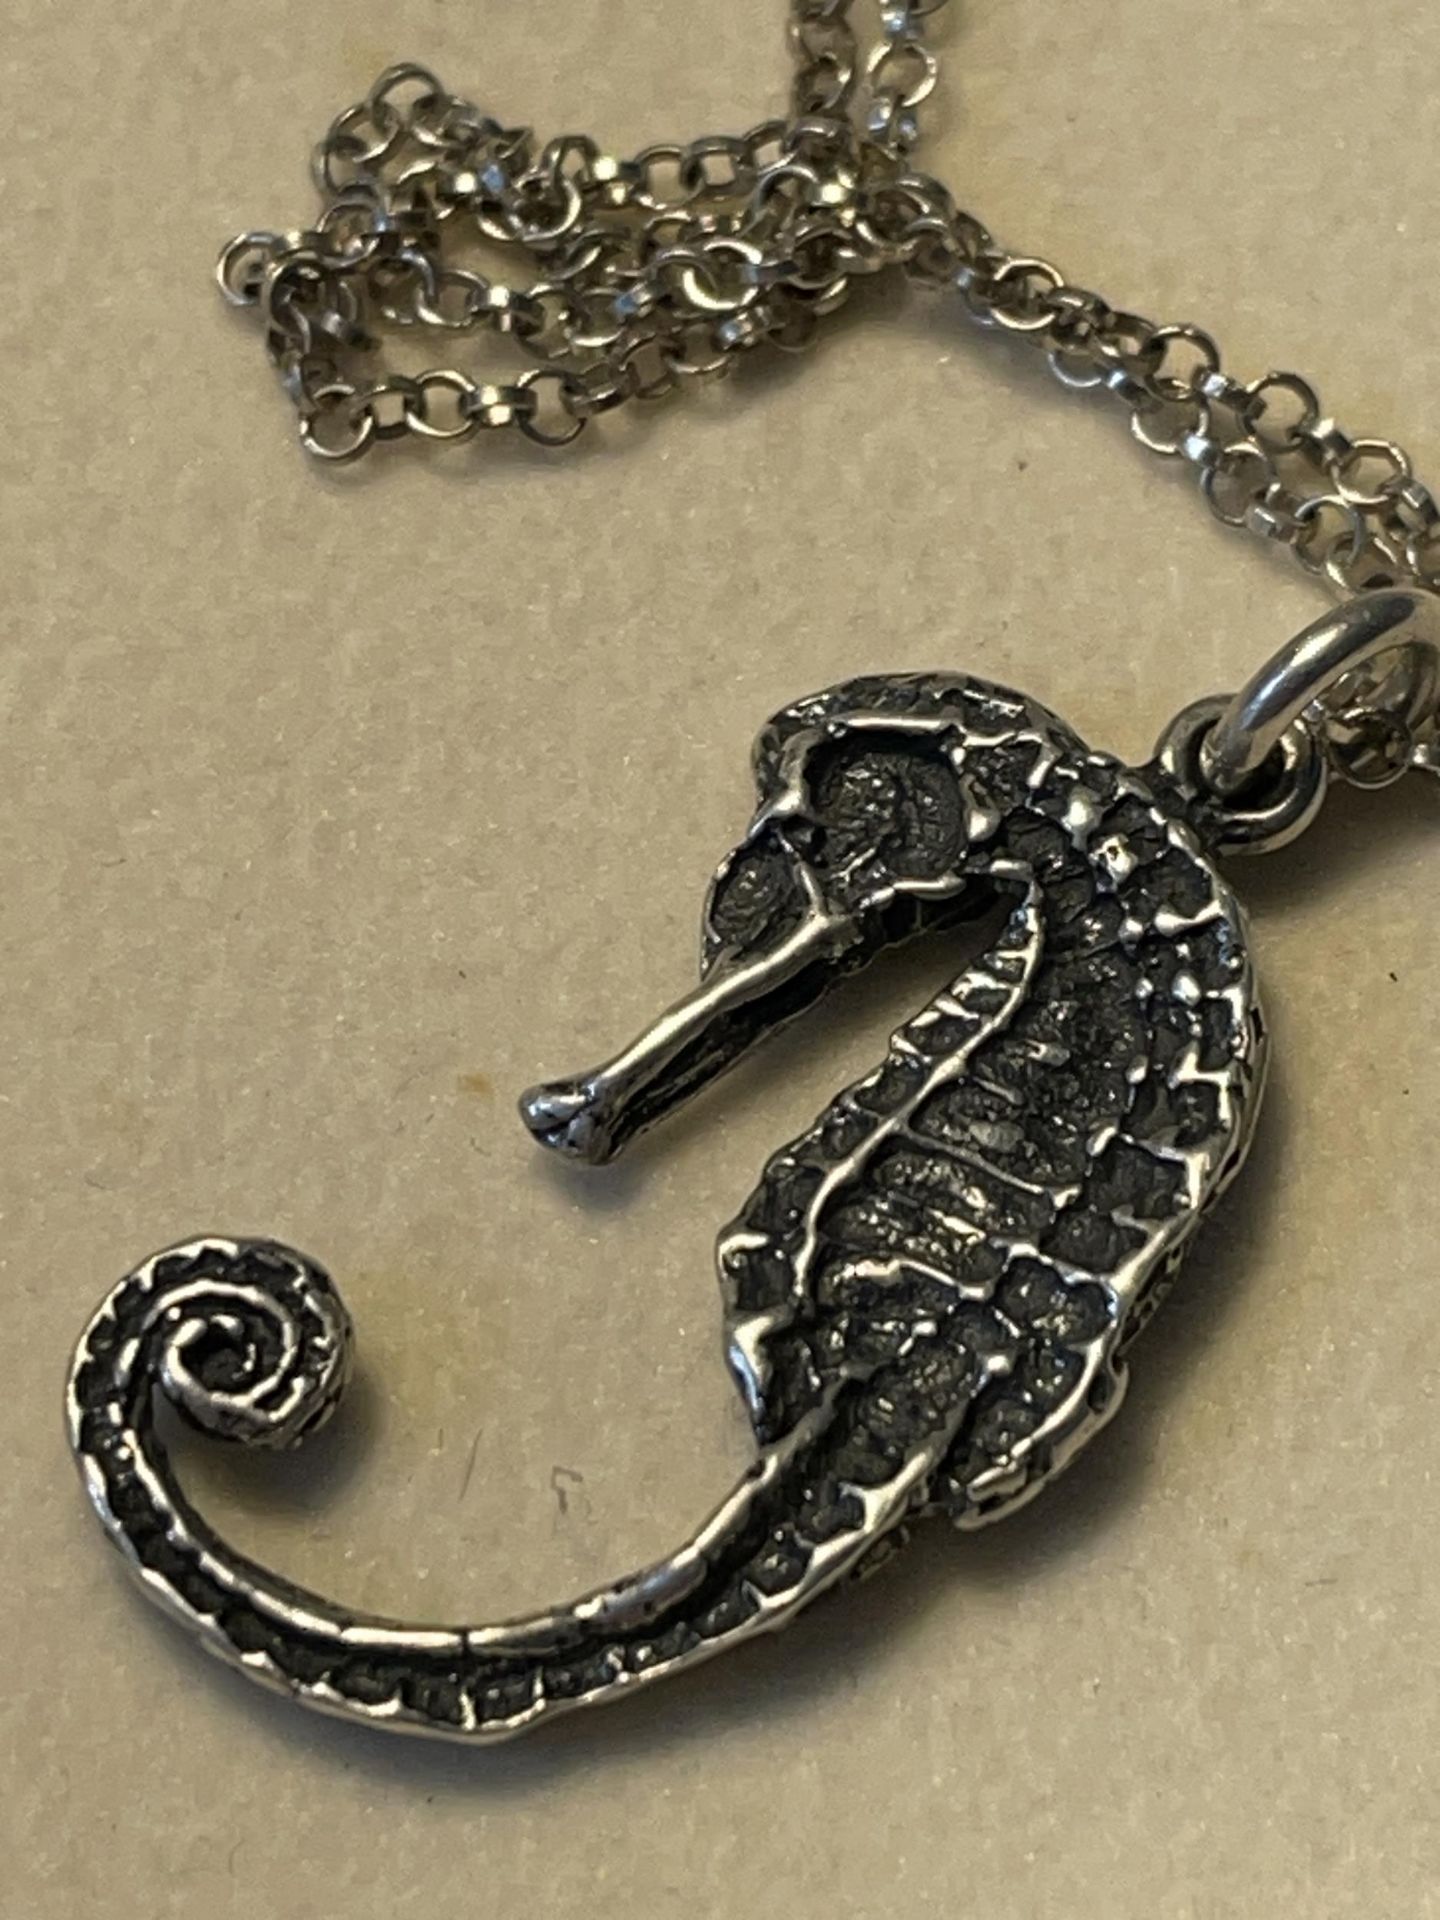 A MARKED 925 SILVER SEAHORSE PENDANT ON A NECKLACE IN A PRESENTATION BOX - Image 3 of 3